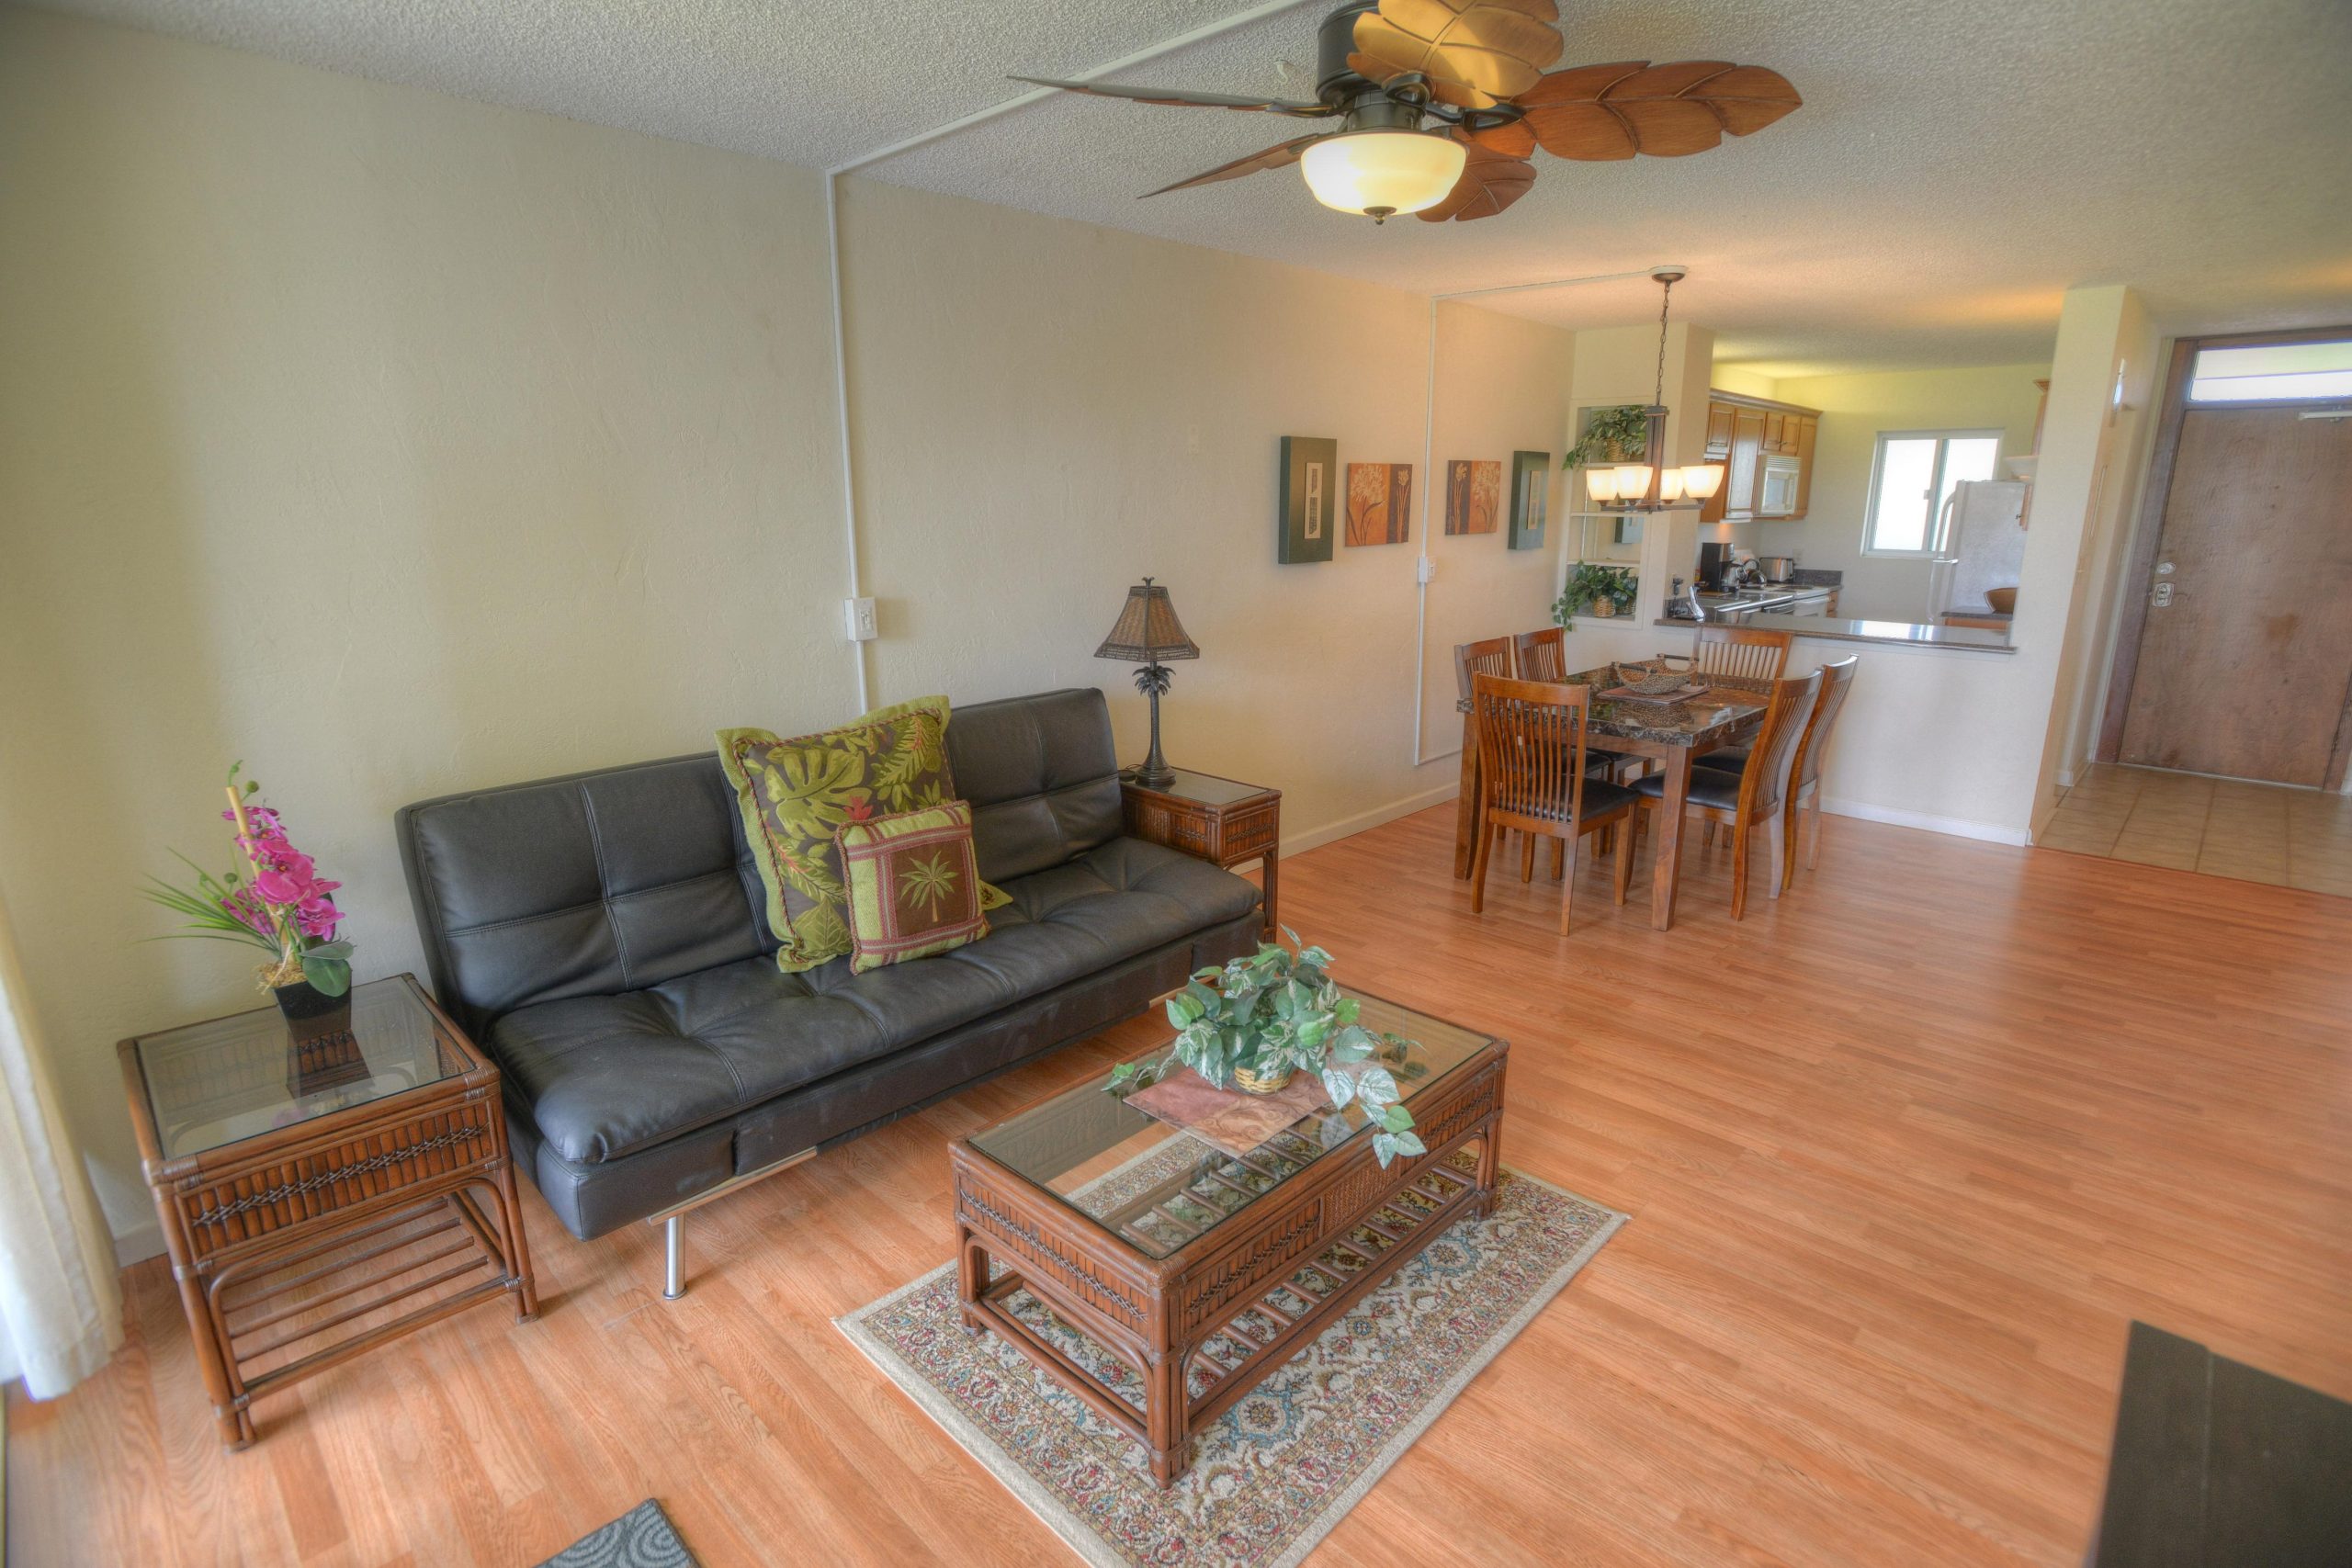 Great Space - The living room furnishings are comfortable, the view is spectacular, and the Hawaii experience is just around the corner. Book your stay at Menehune Shores 225 today!